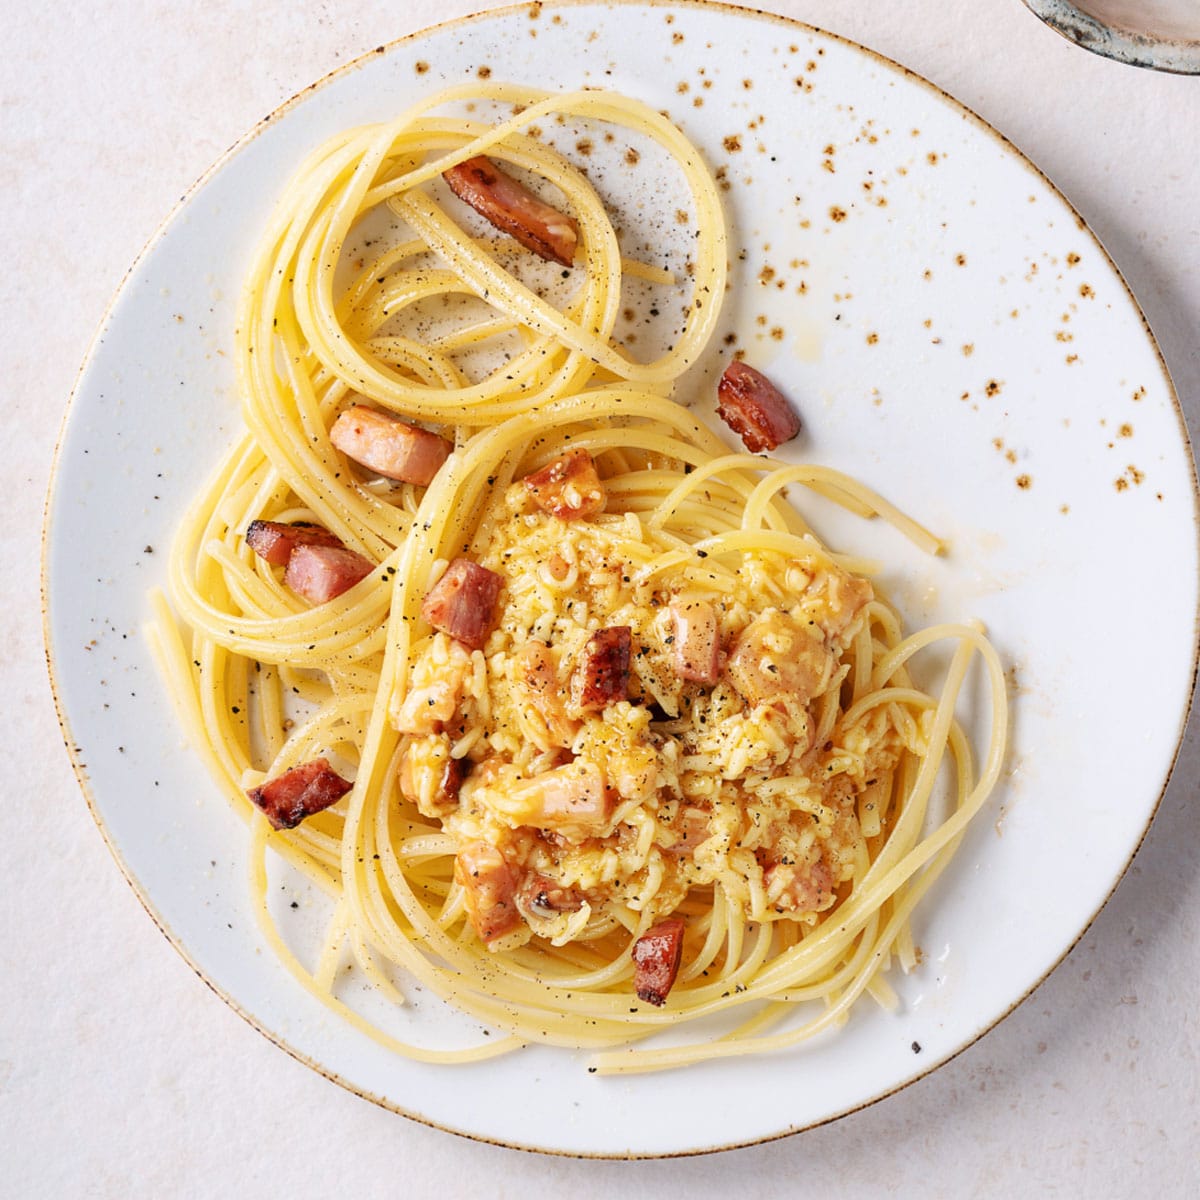 We all know the joys of digging into a creamy, delicious carbonara. But when faced with leftovers, reheating becomes a challenge. I've experimented with various methods, and today, I want to share my oven reheating secrets with you.